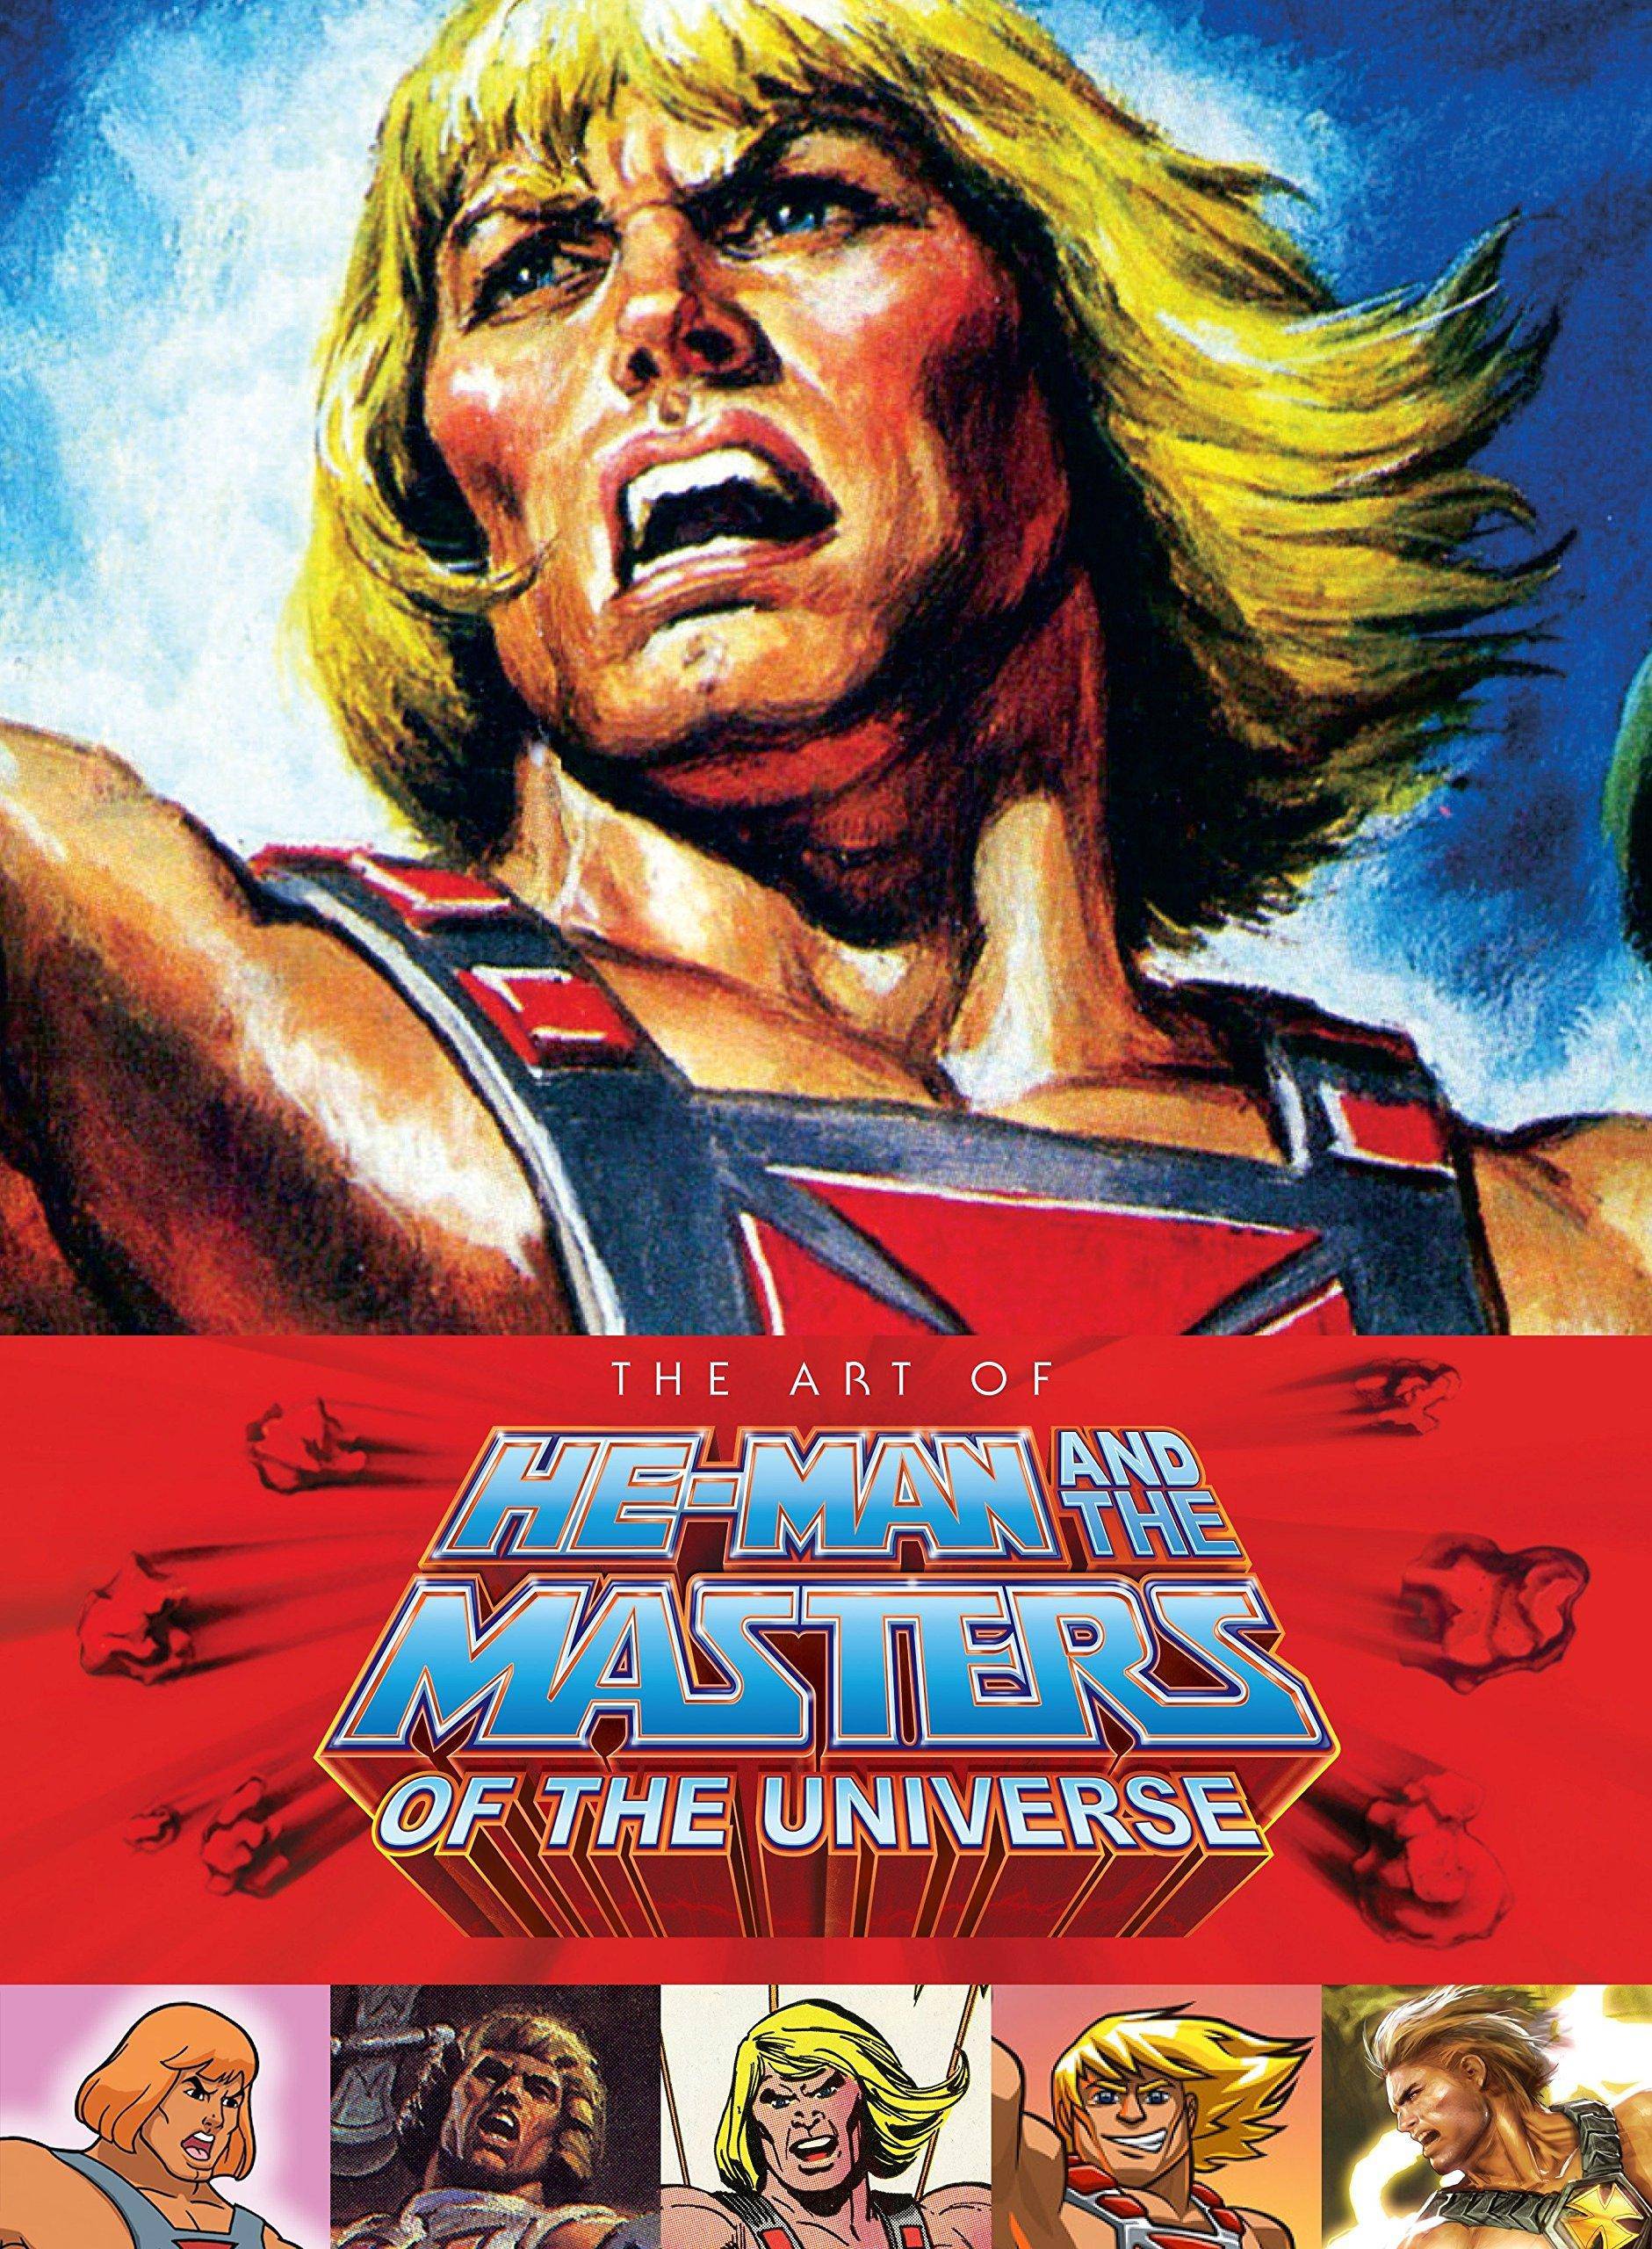 Art of He Man and the Masters of the Universe - SureShot Books Publishing LLC